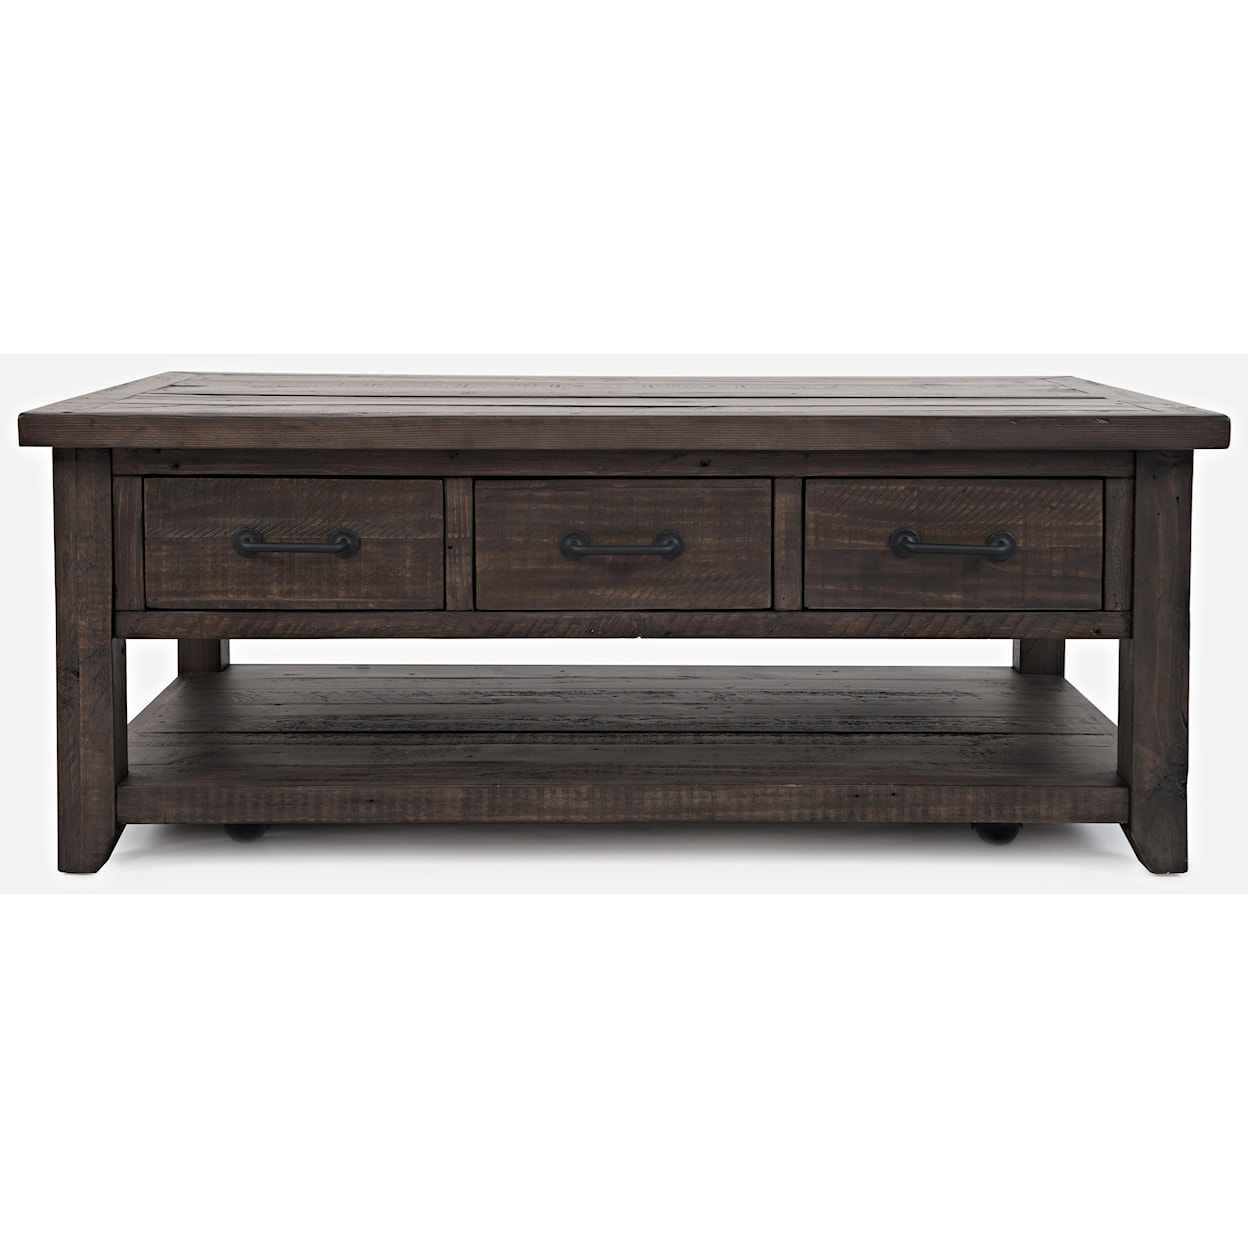 Jofran Madison County 3 Drawer Cocktail Table